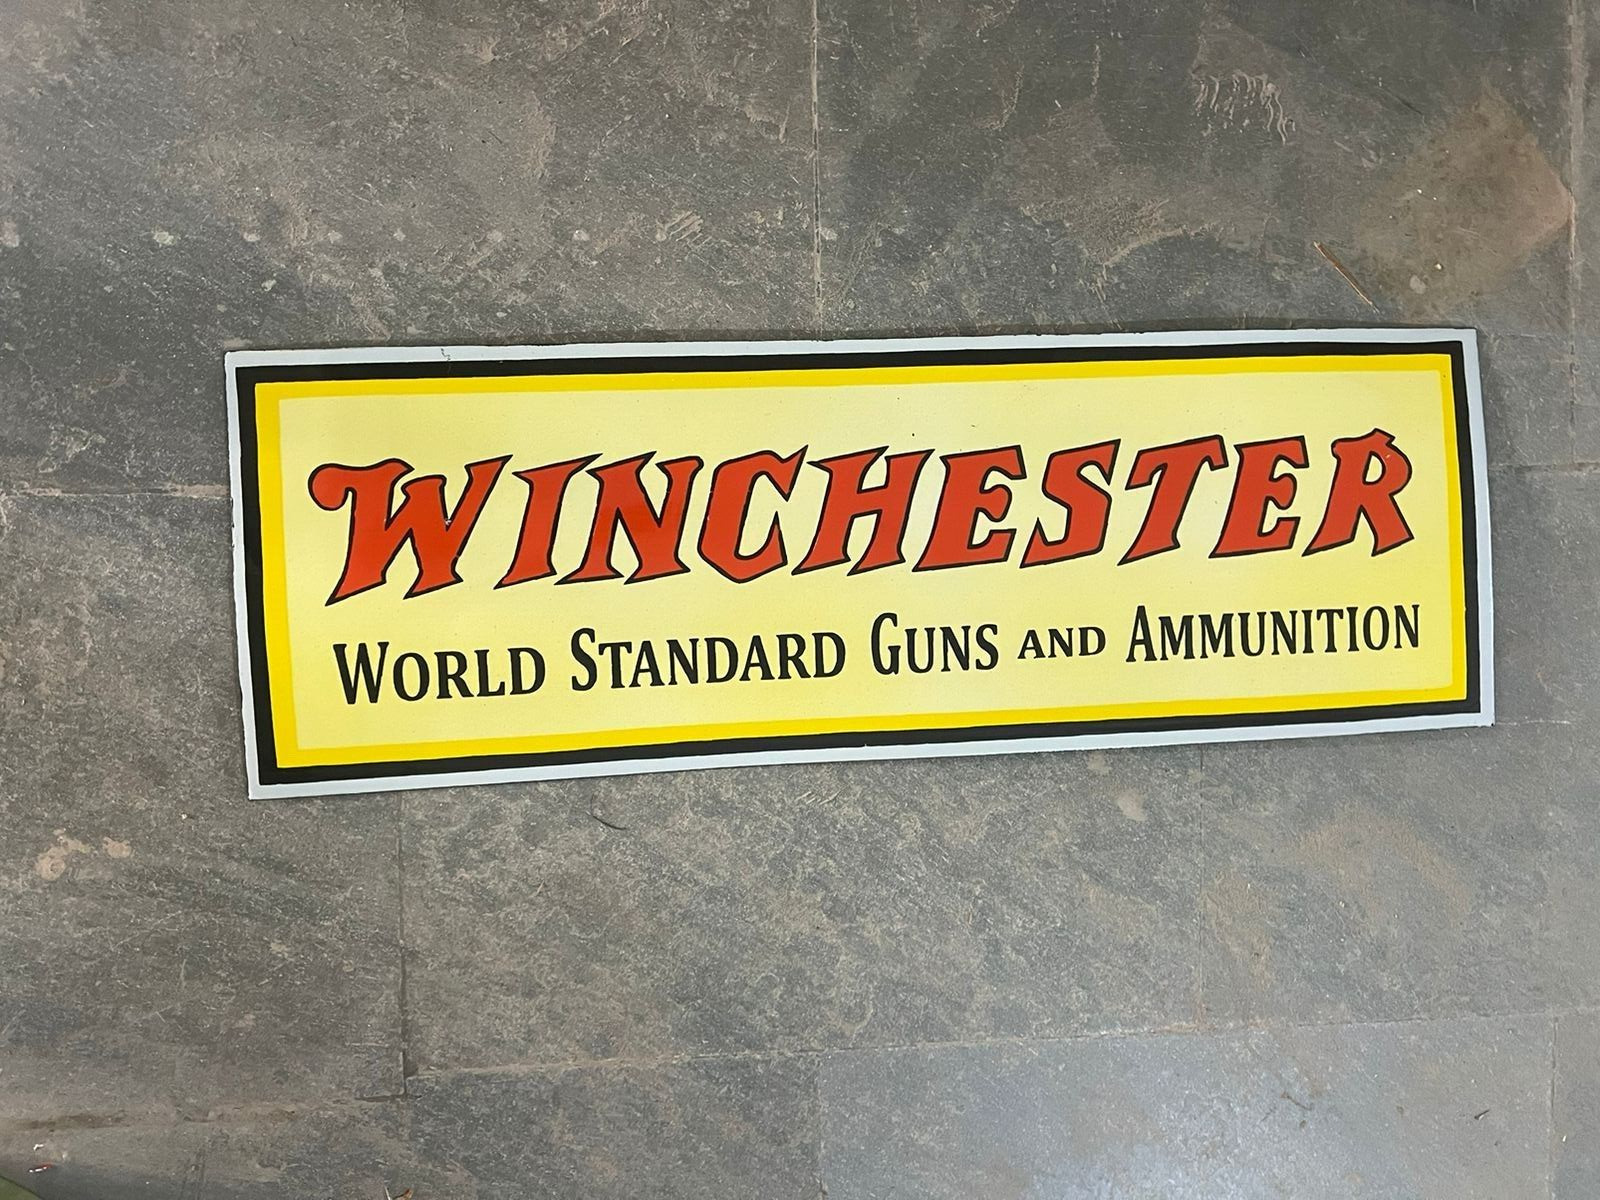 RARE PORCELAIN WINCHESTER ENAMEL SIGN 36X12 INCHES SSP DIE CUT